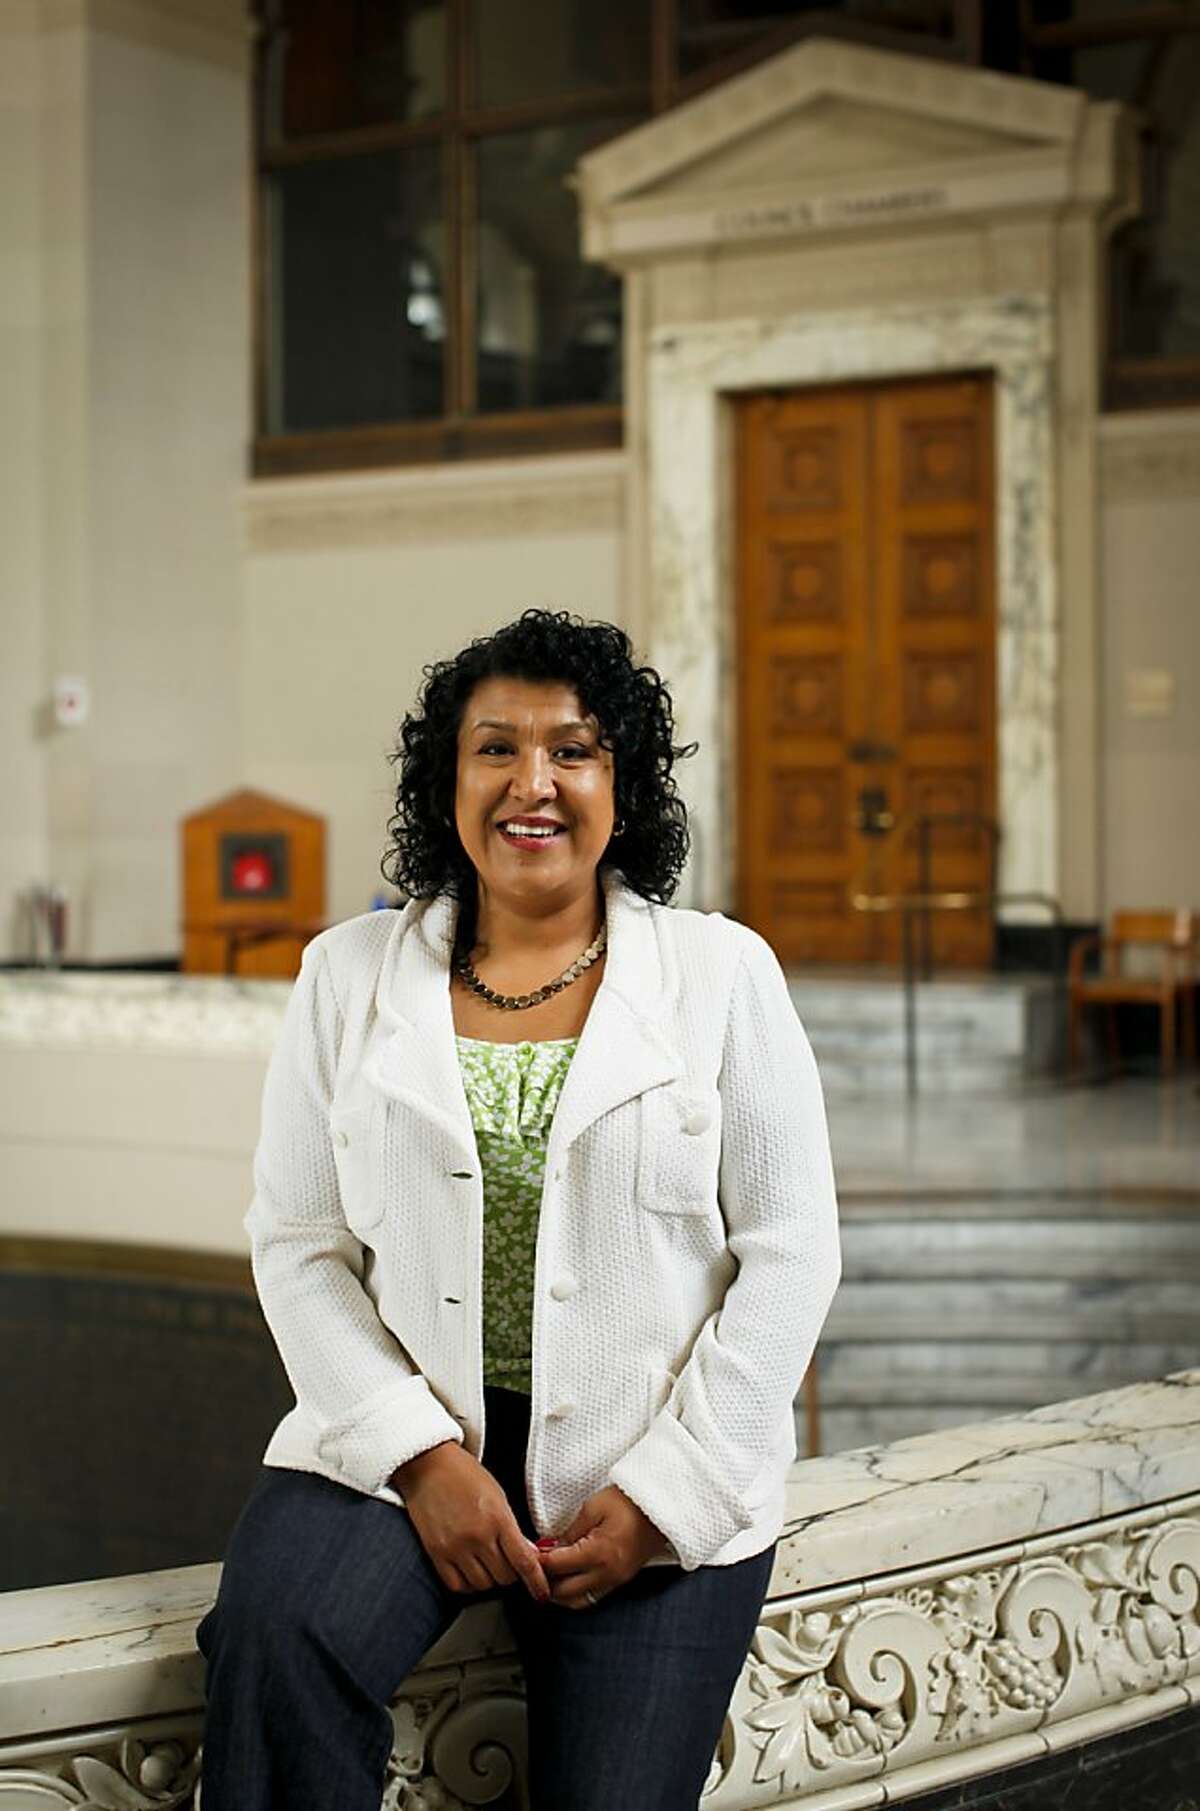 Oakland City Administrator Deanna Santana is seen on Friday, June 29, 2012 at City Hall in Oakland, Calif.